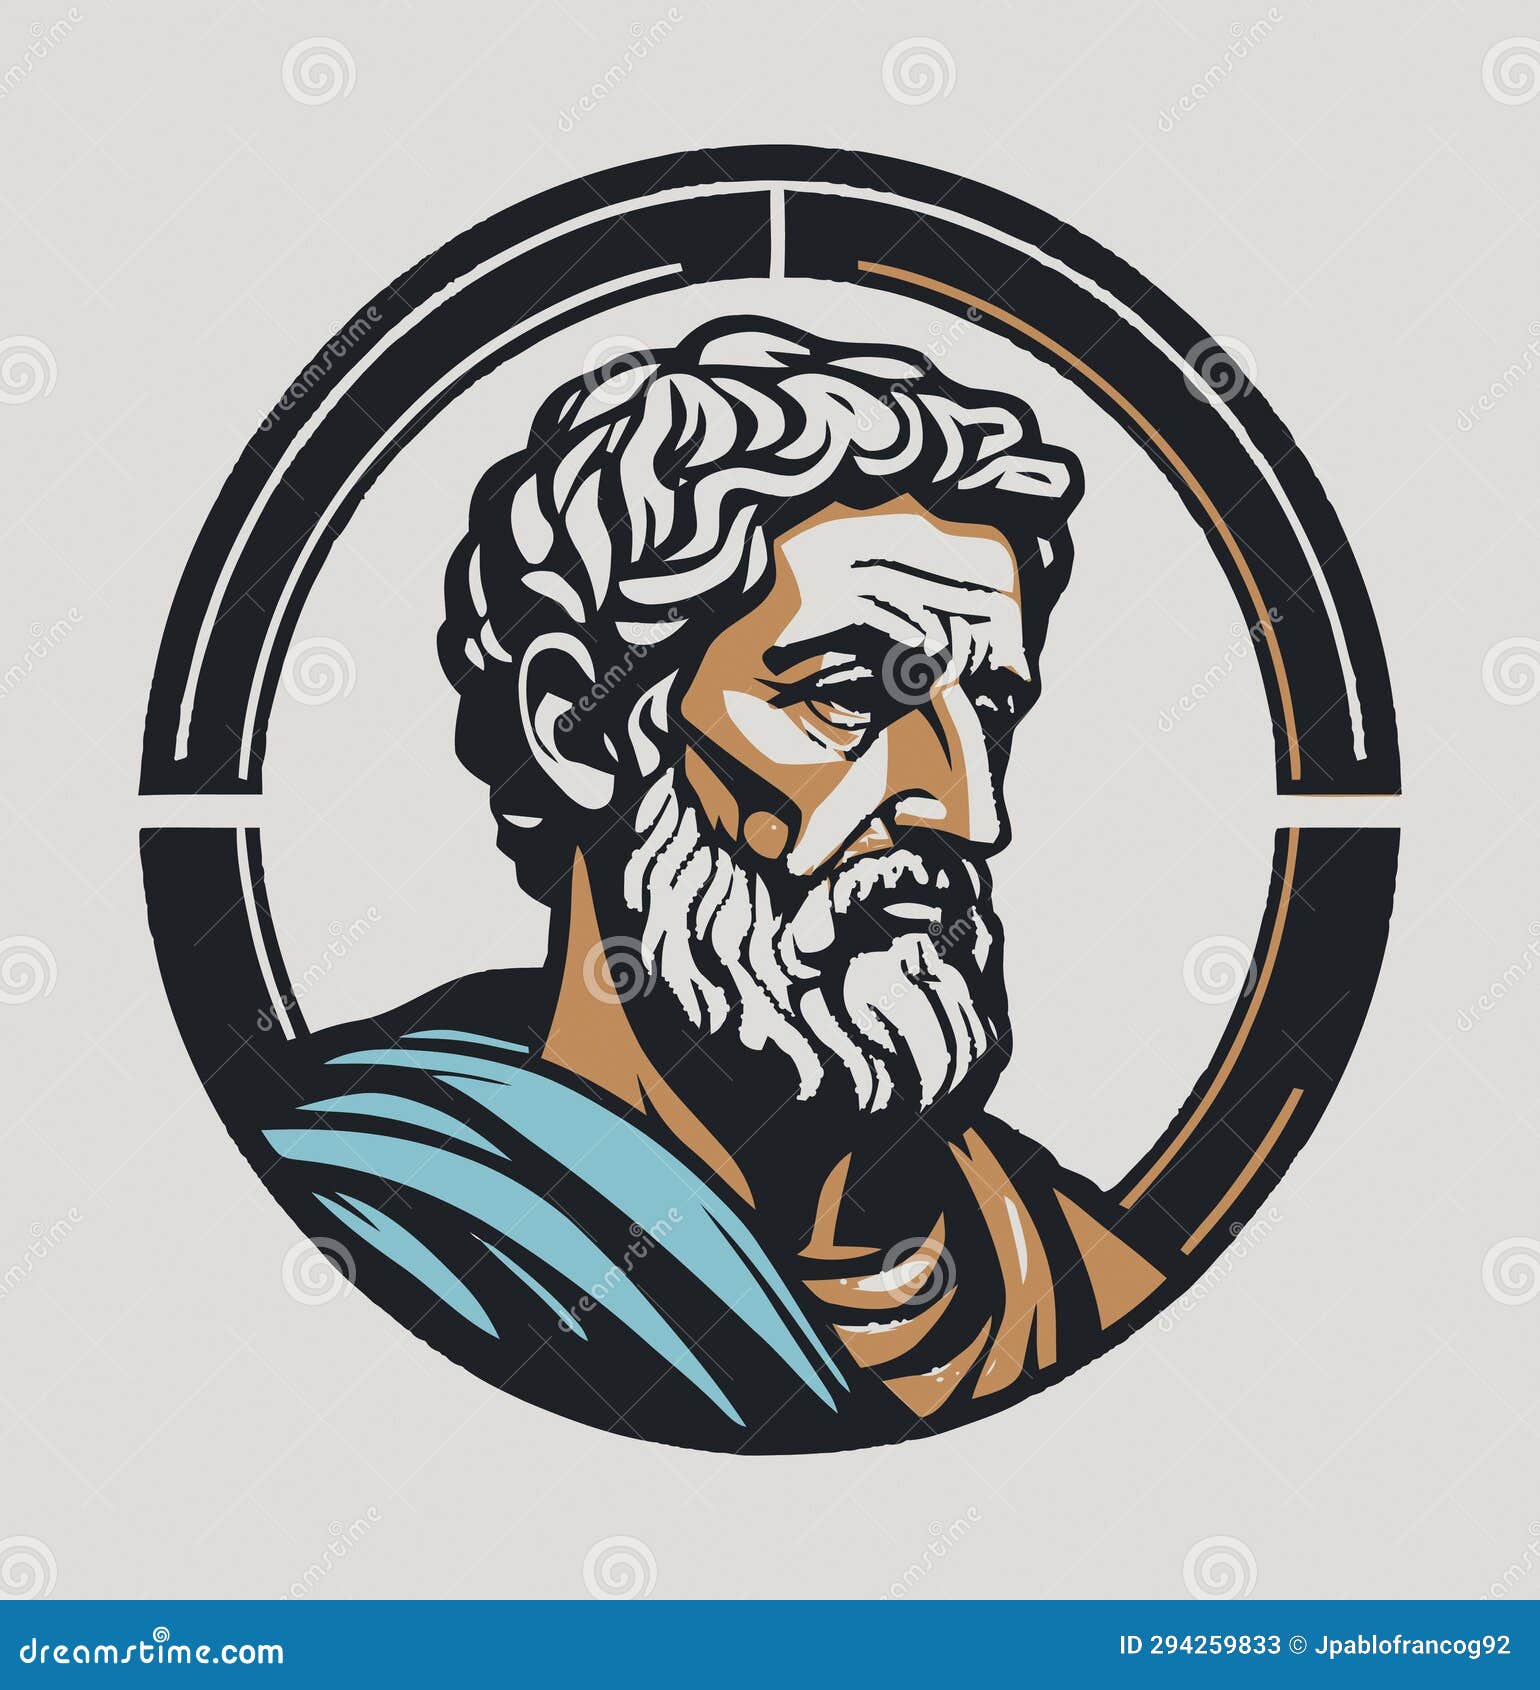 colored stoic man badge to use in current projects